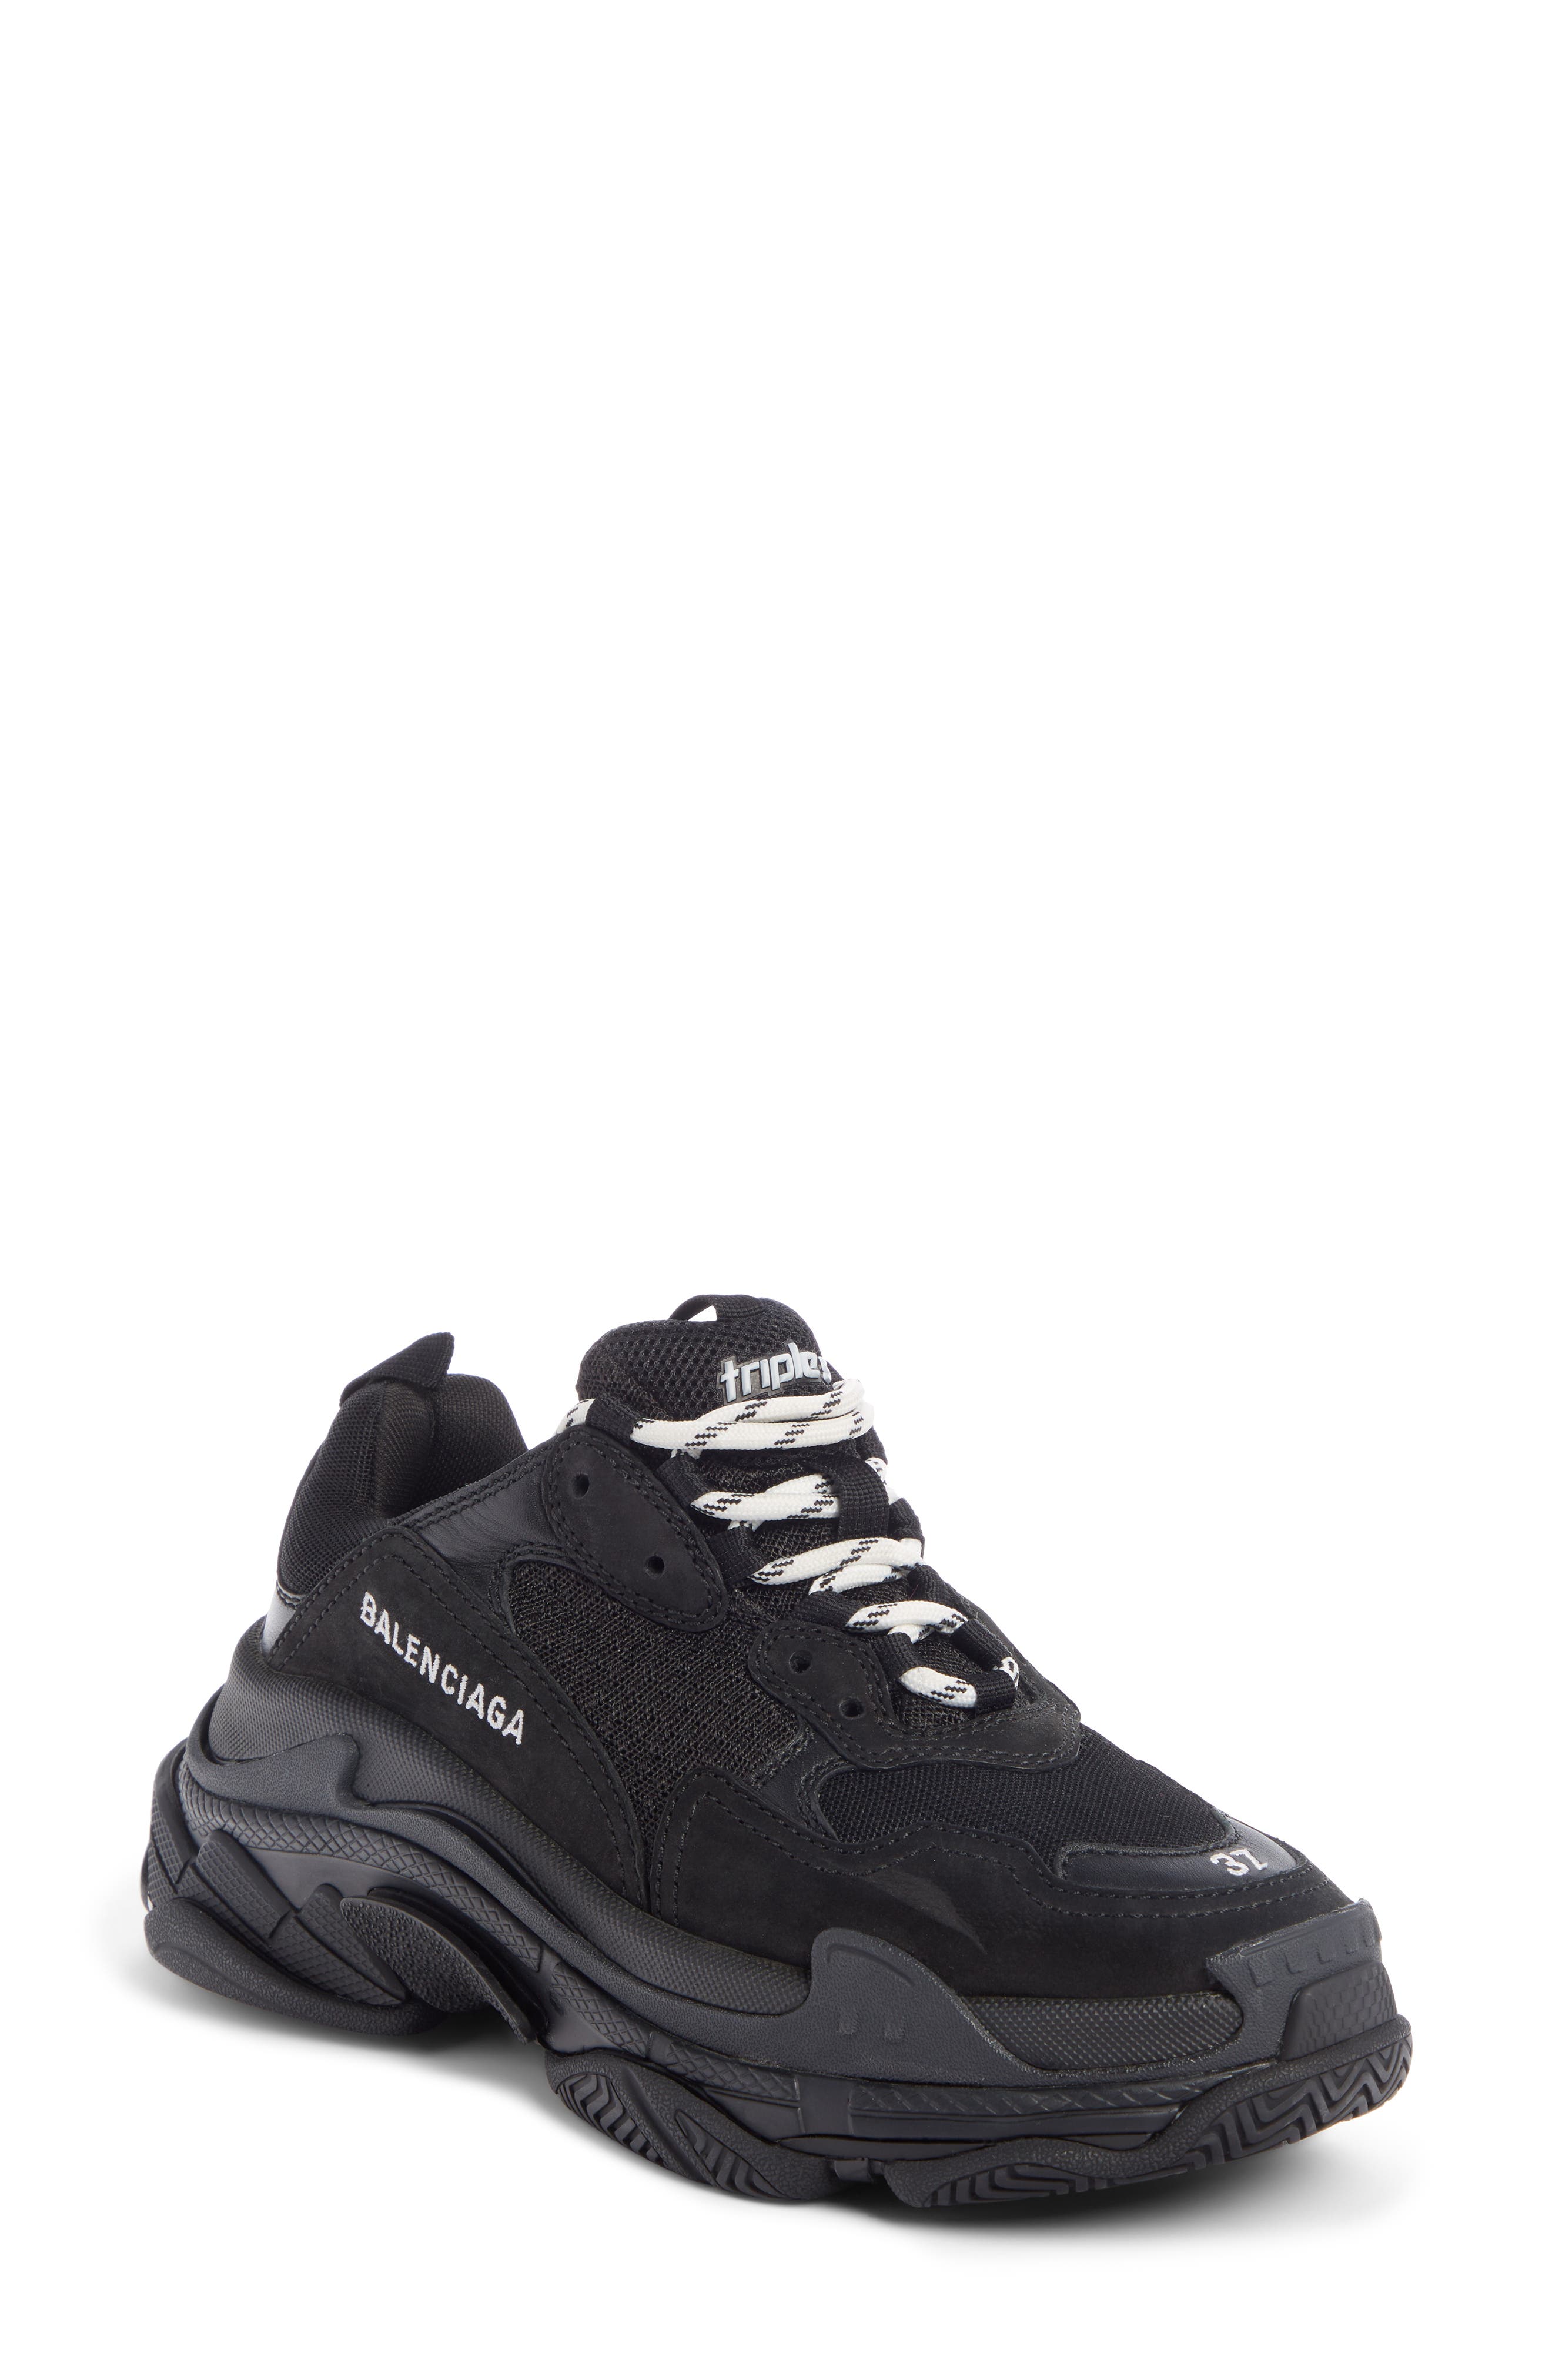 Balenciaga track sneakers Just Trendy Girls Shoes in 2019